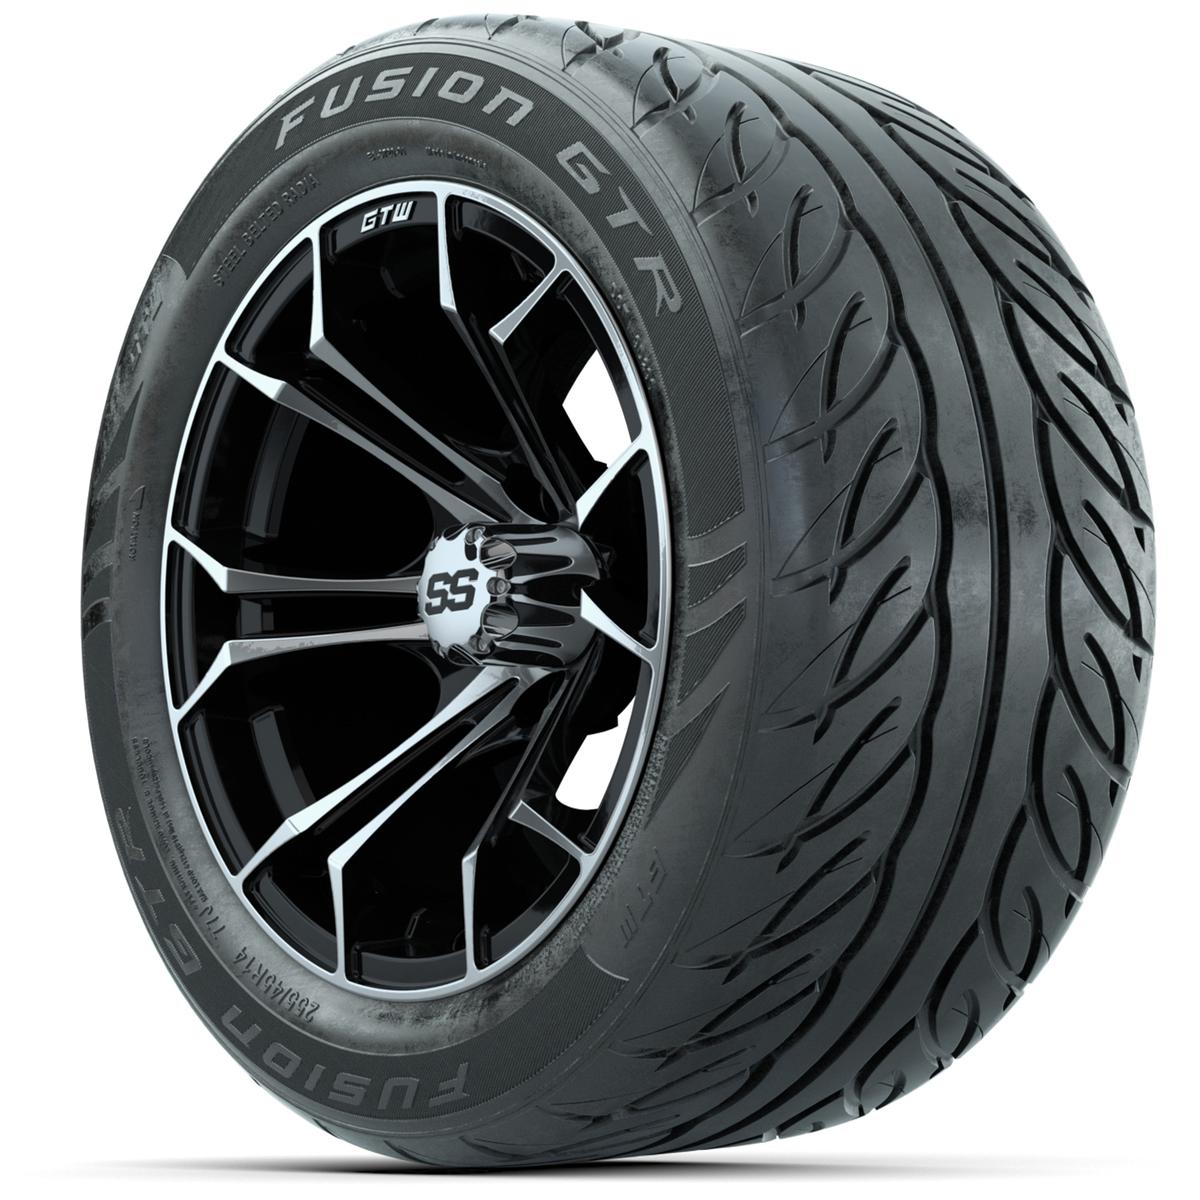 GTW Spyder Machined/Black 14 in Wheels with 255/45-R14 Fusion GTR Street Tires – Full Set